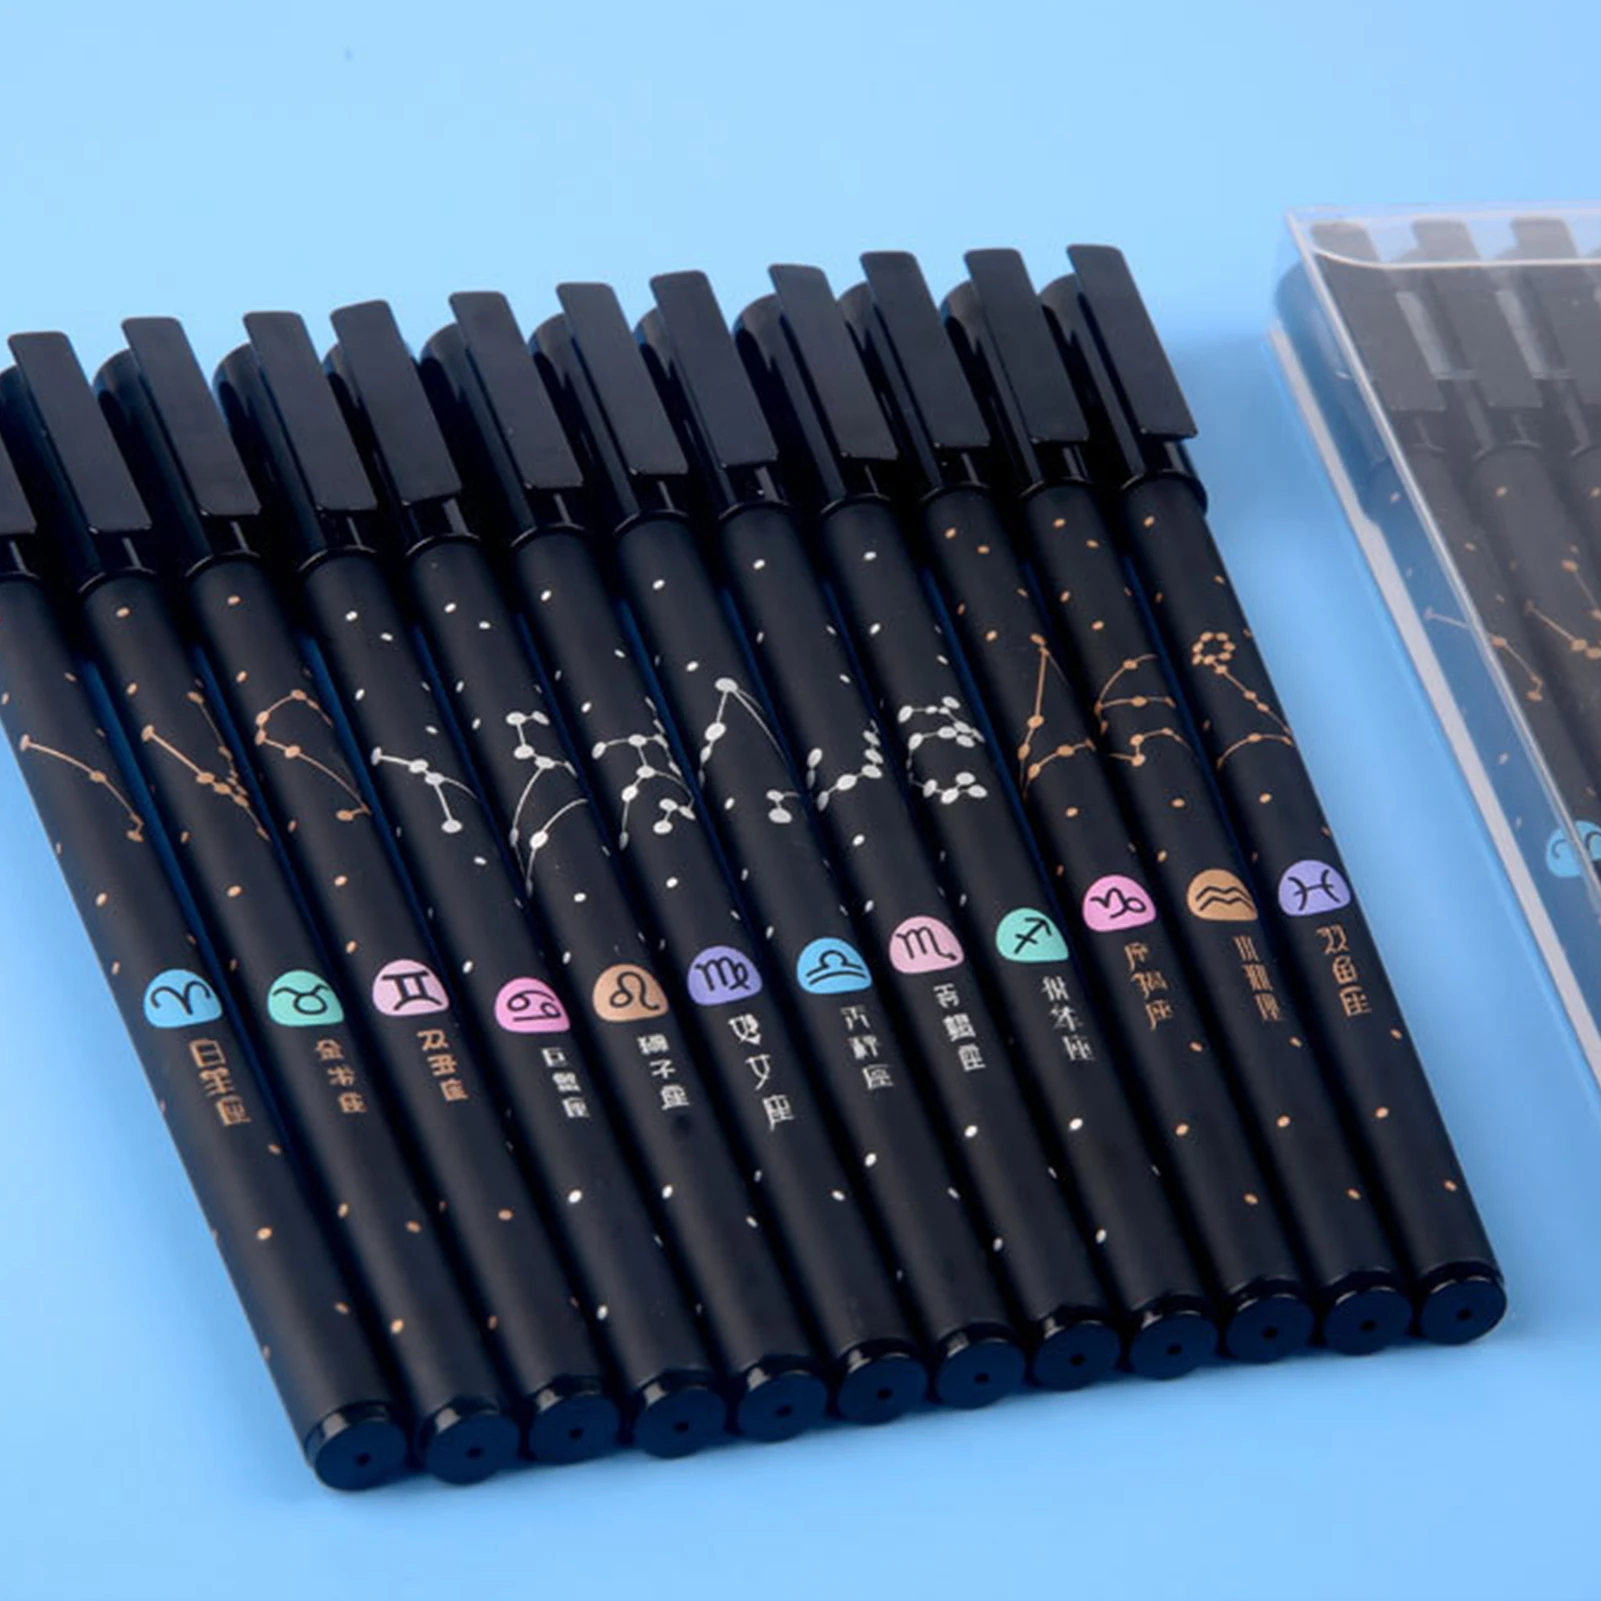 

12Pcs/Set Constellation Gel Pens 0.5mm Black Ink Pen Quick Drying Smooth Writing for Office School Exam Stationary Supplies